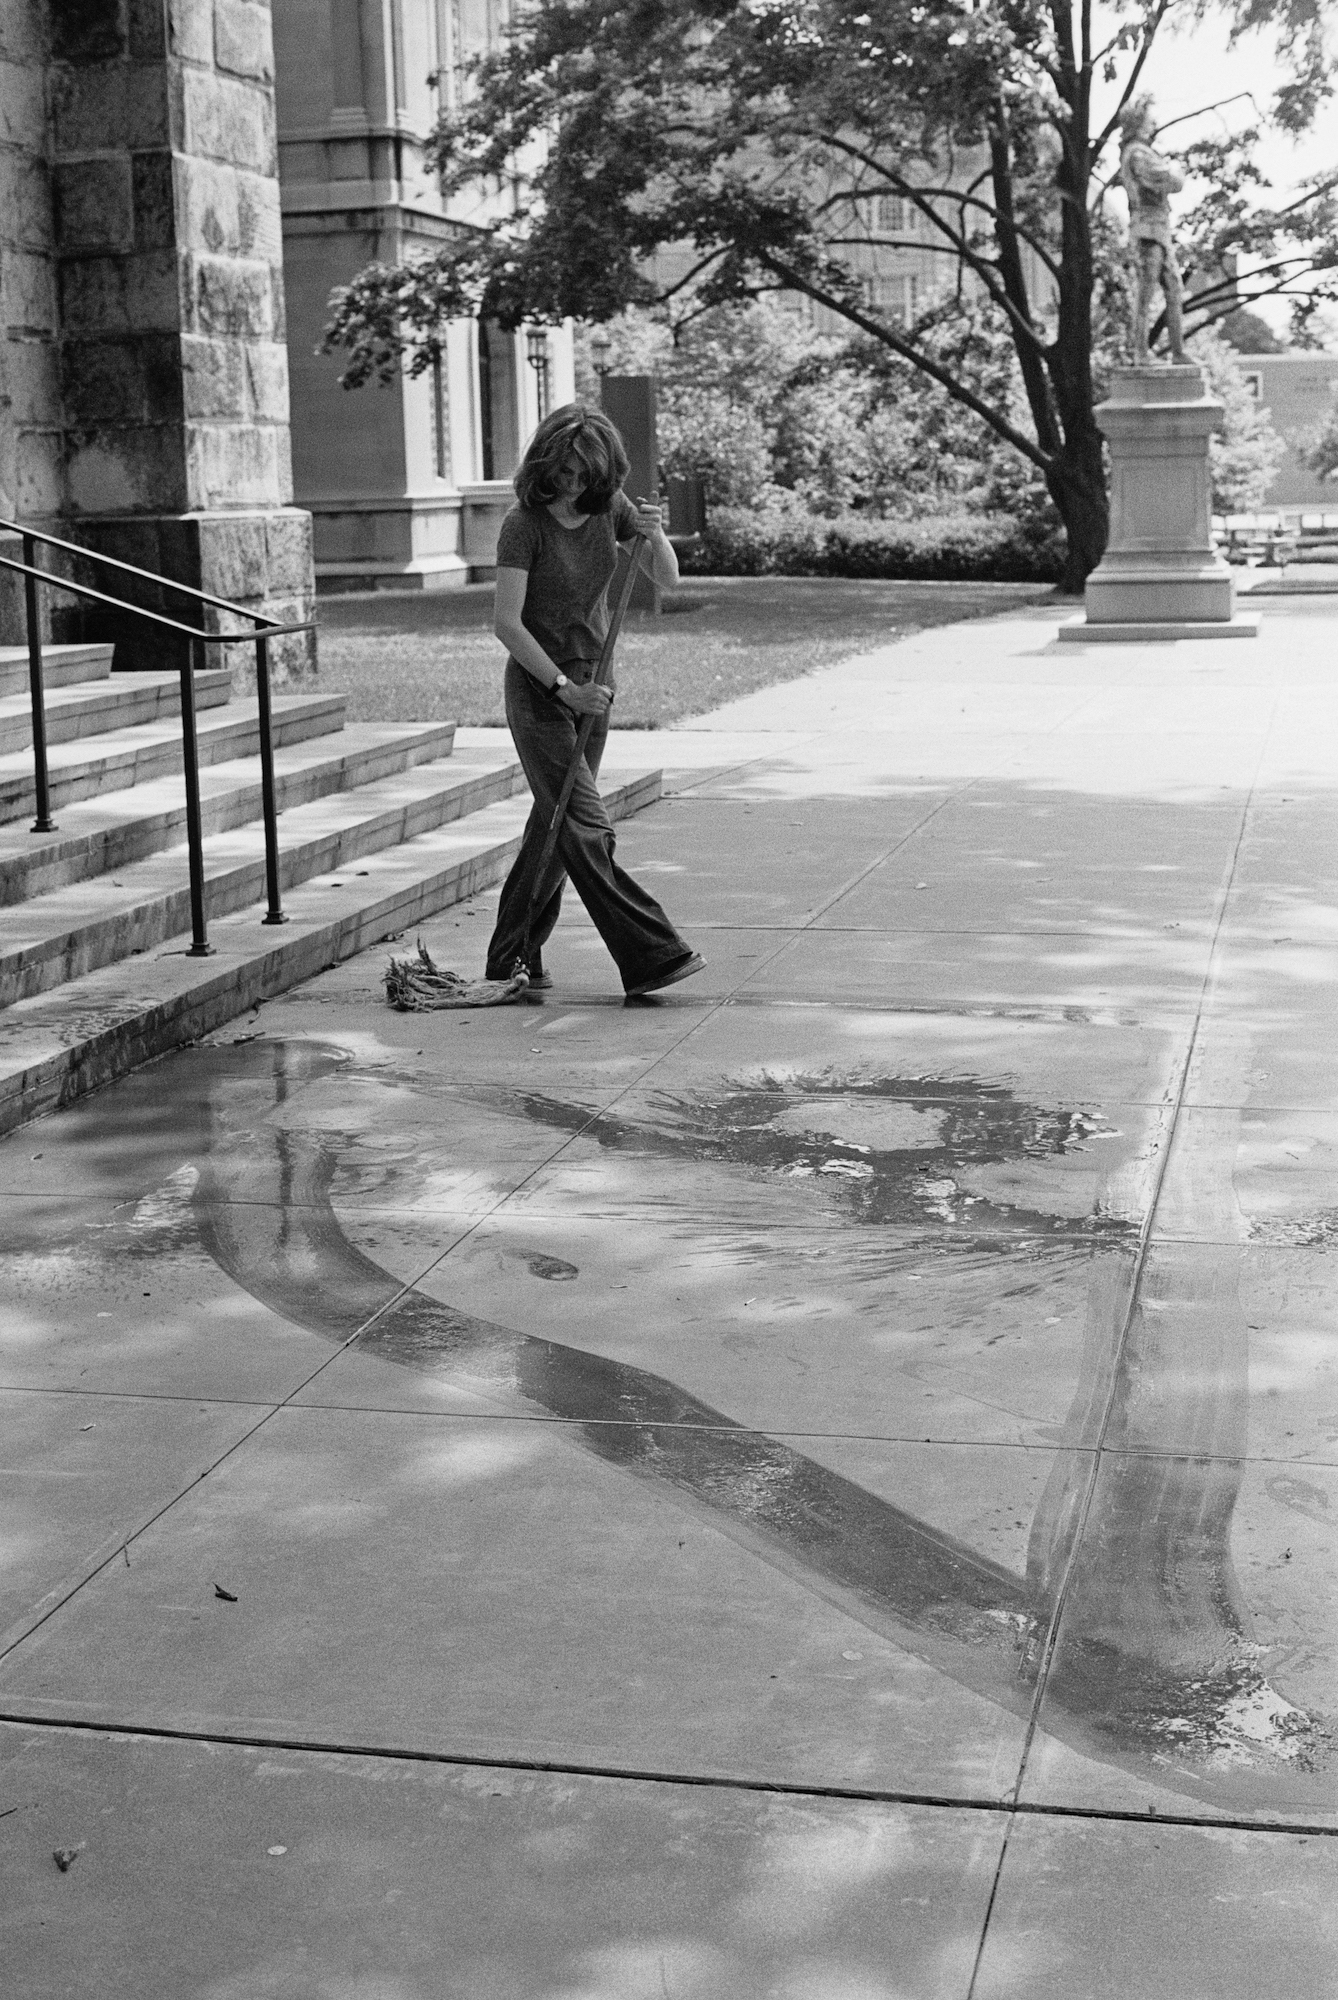 Woman mopping sidewalk outside of building in black and white.